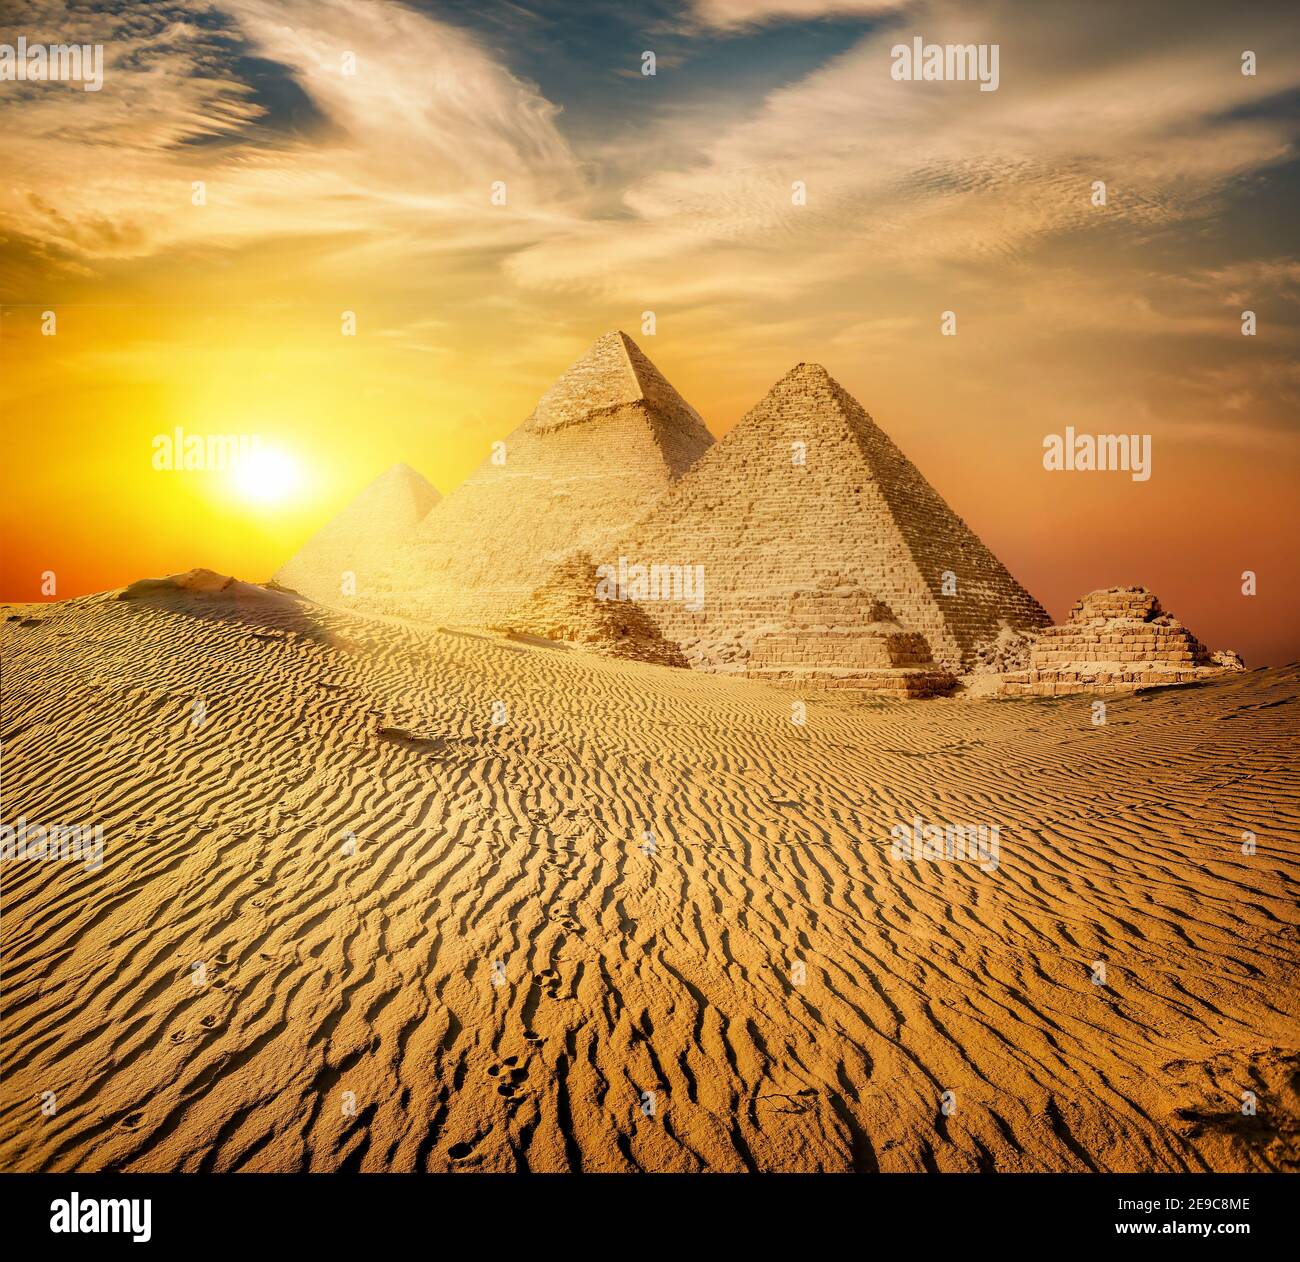 Egyptian pyramid in sand desert and clear sky. Stock Photo